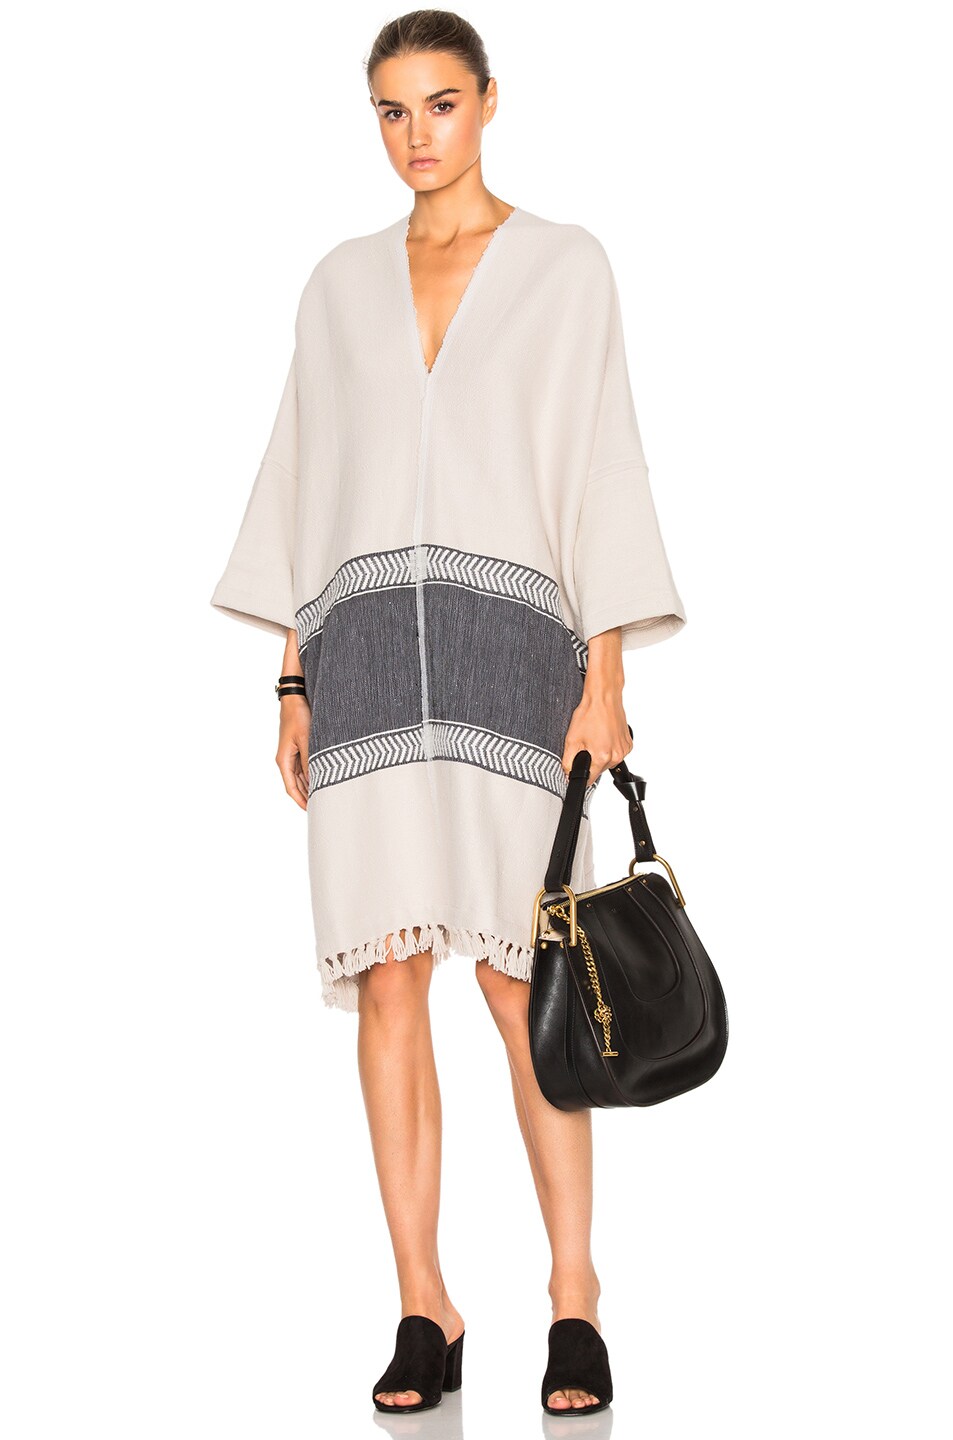 Image 1 of Lemlem Yohannes Blanket Poncho in Oatmeal